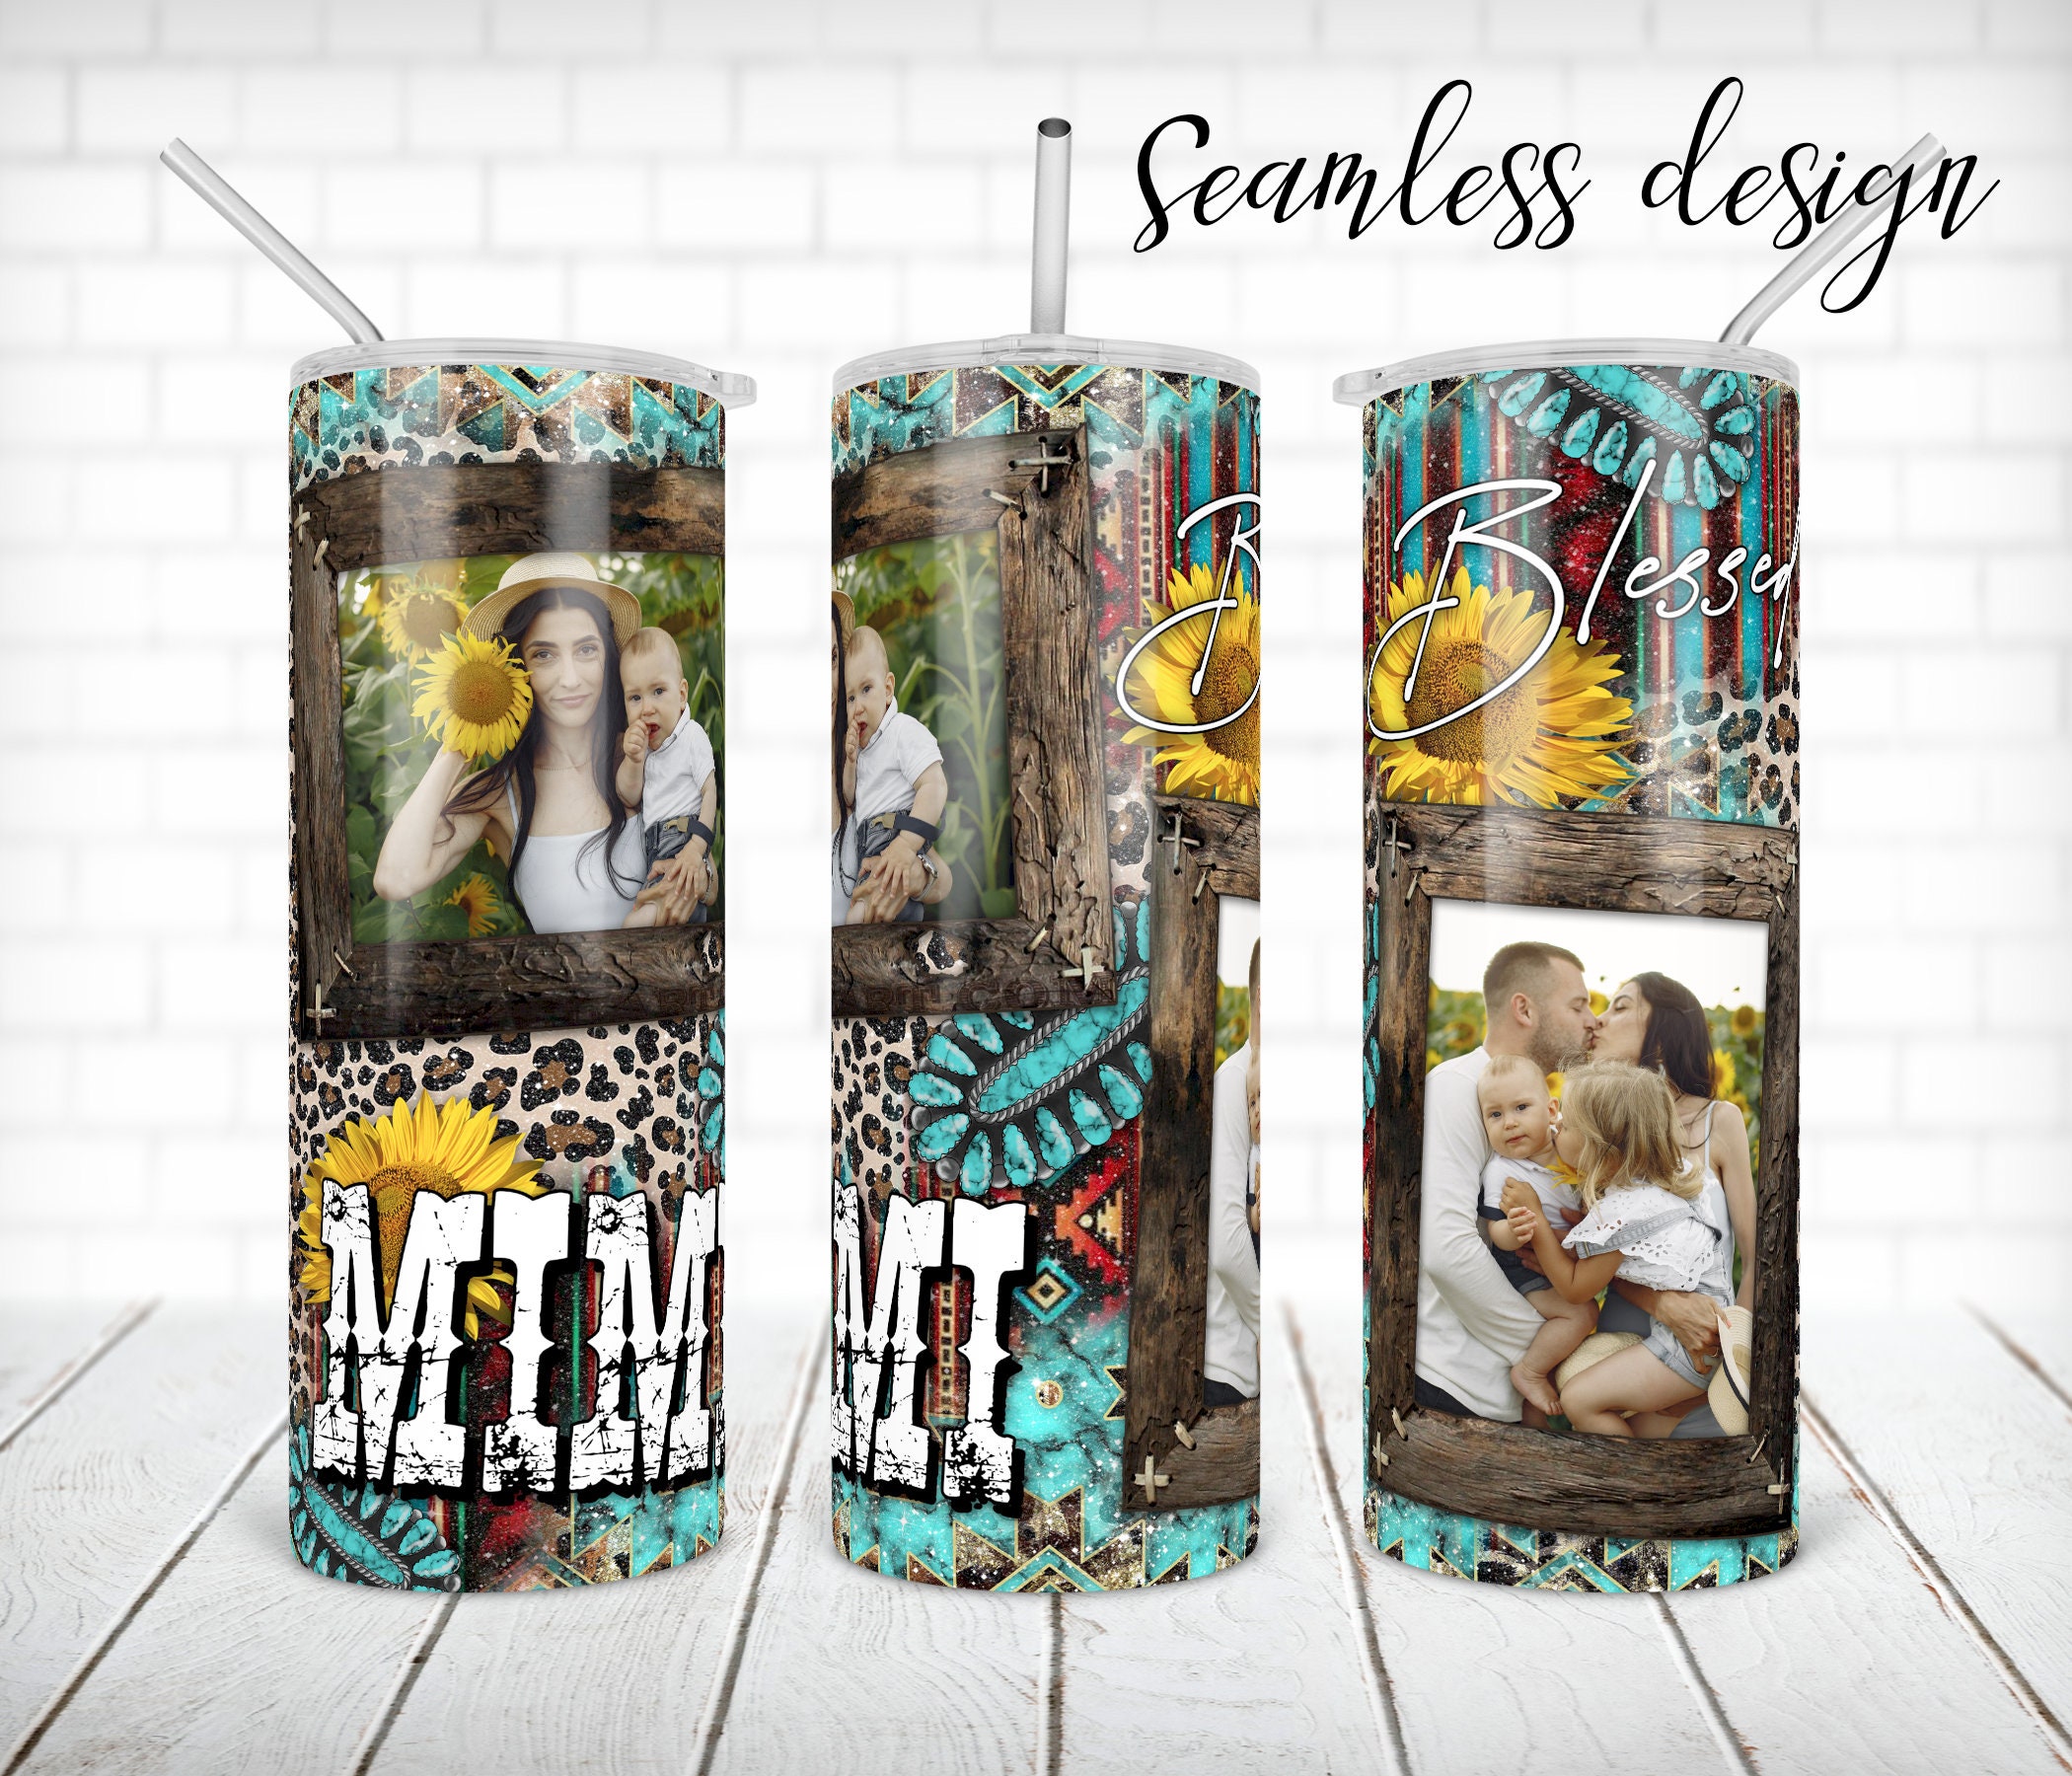 20 oz MIMI sublimation tumblers! Choose your Design. FREE shipping!